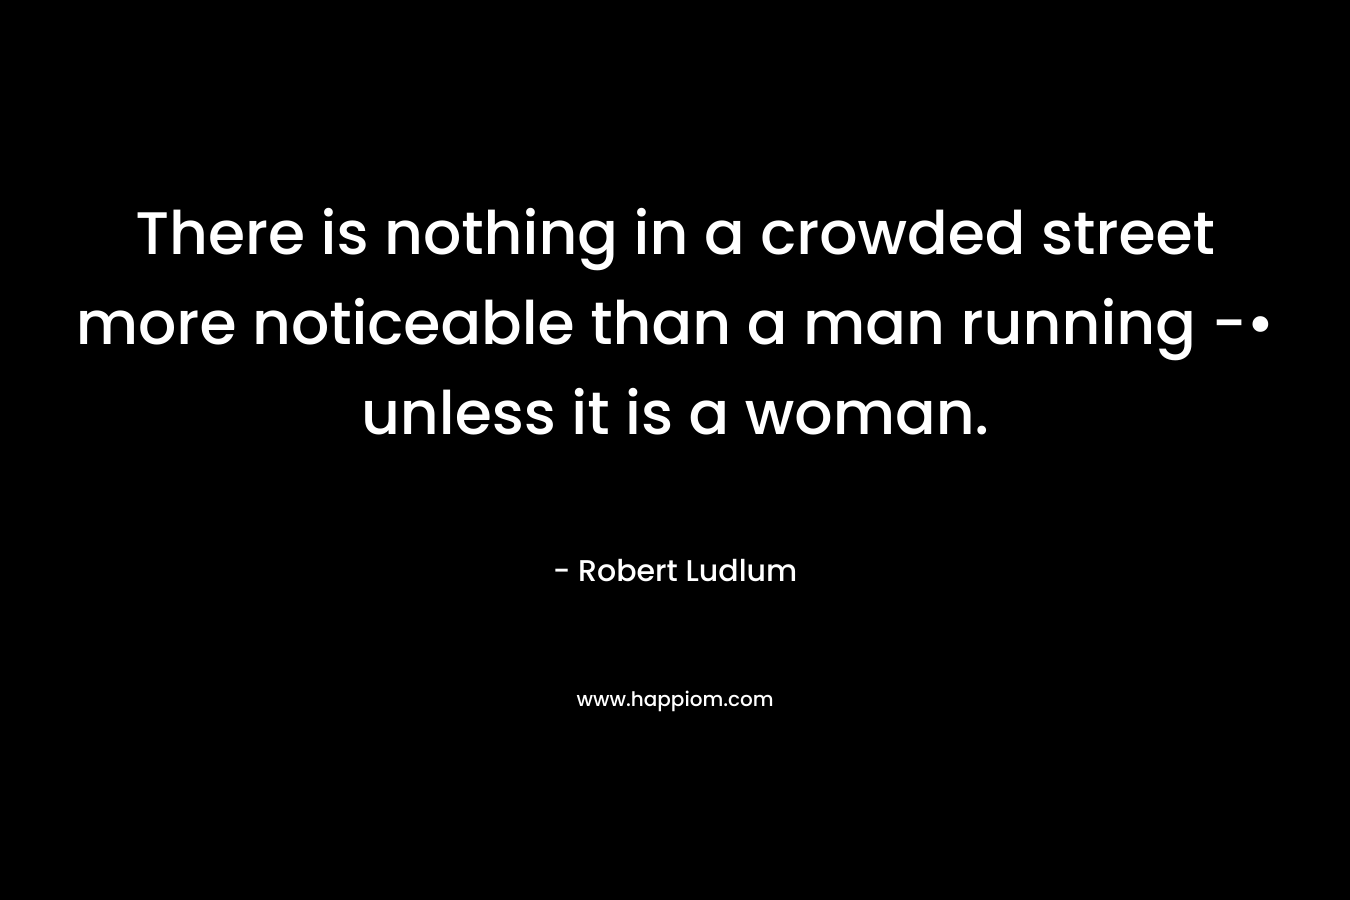 There is nothing in a crowded street more noticeable than a man running -• unless it is a woman.